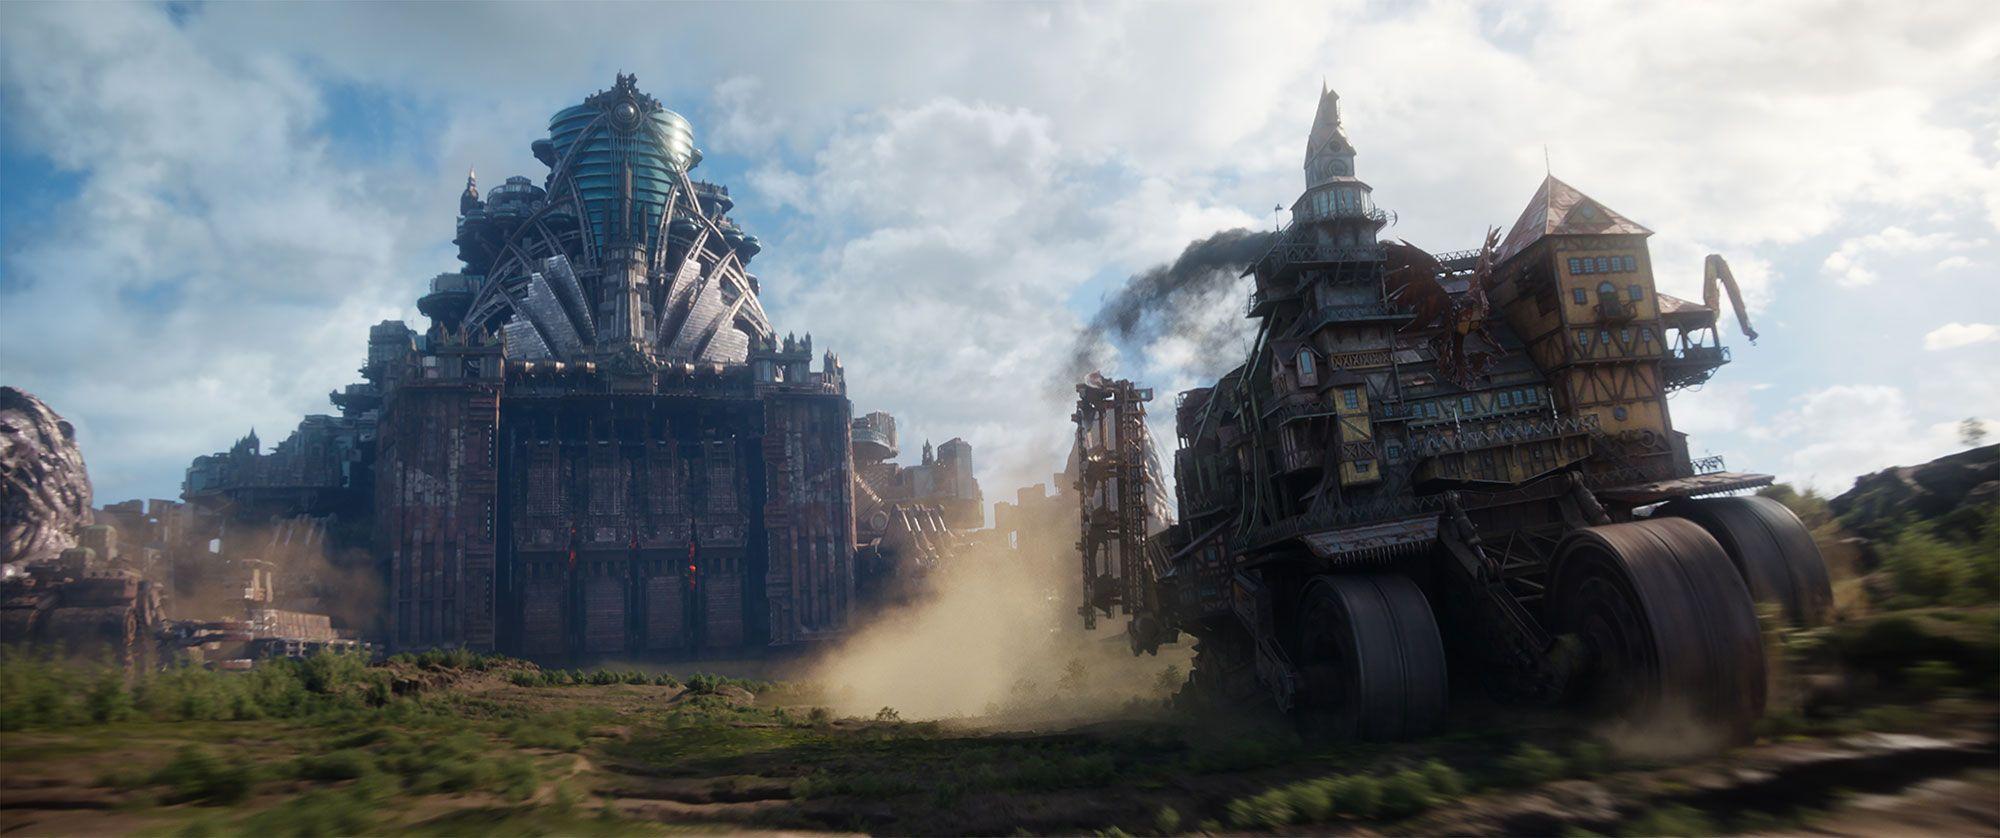 Mortal Engines: Robert Sheehan & Leila George Play Would You Rather